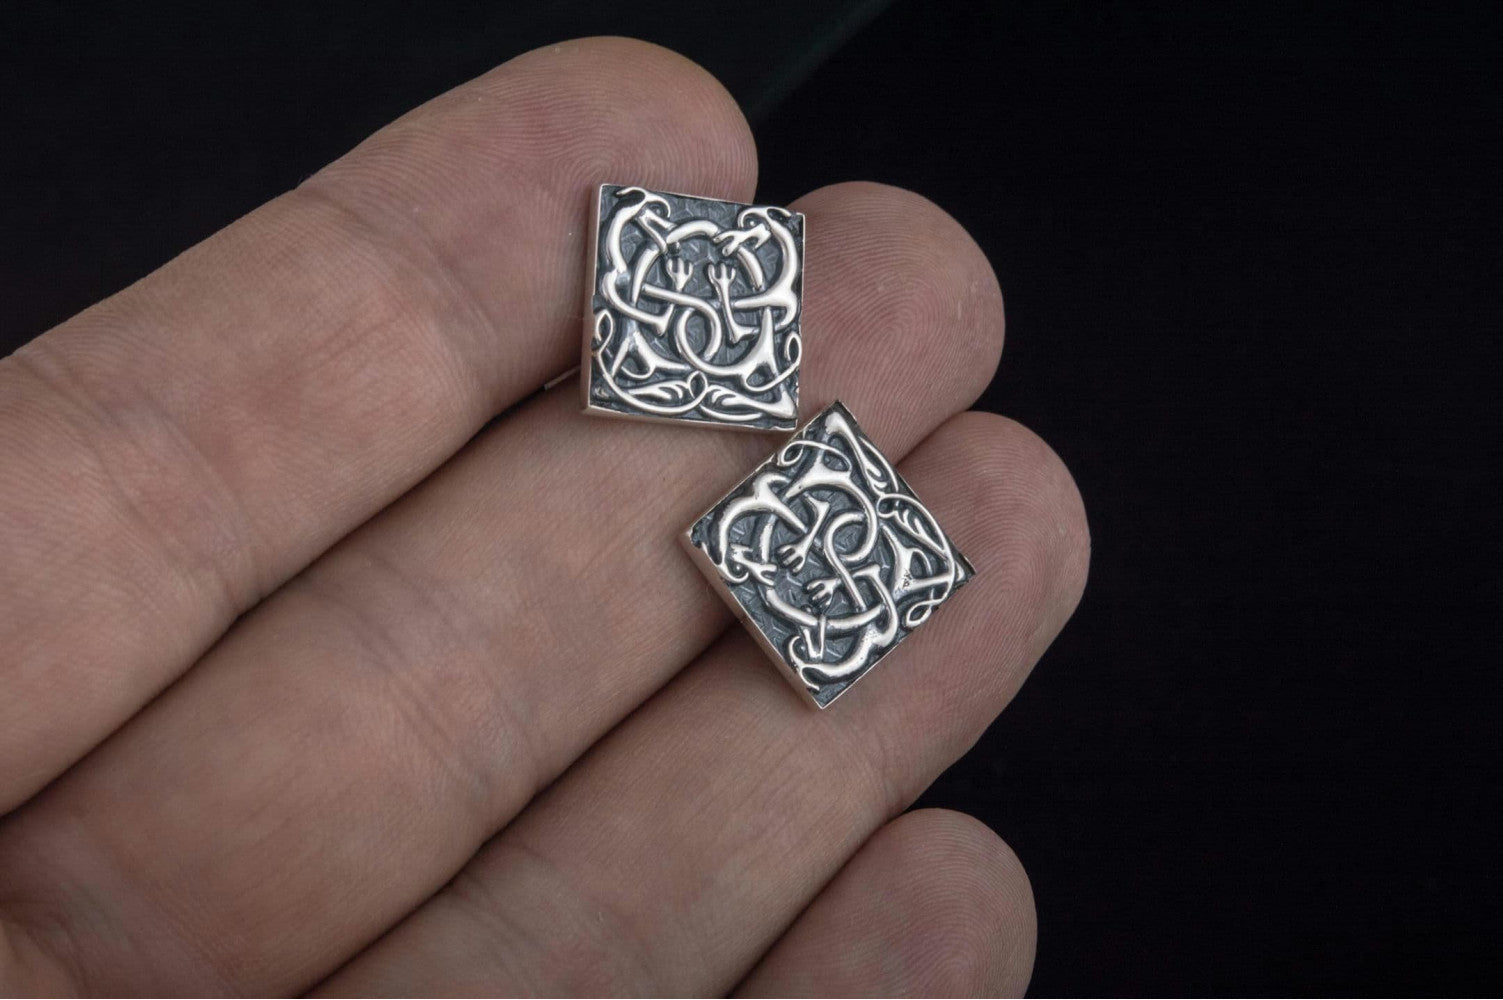 Unique Cufflinks with Norse Ornament Sterling Silver Handmade Jewelry V02